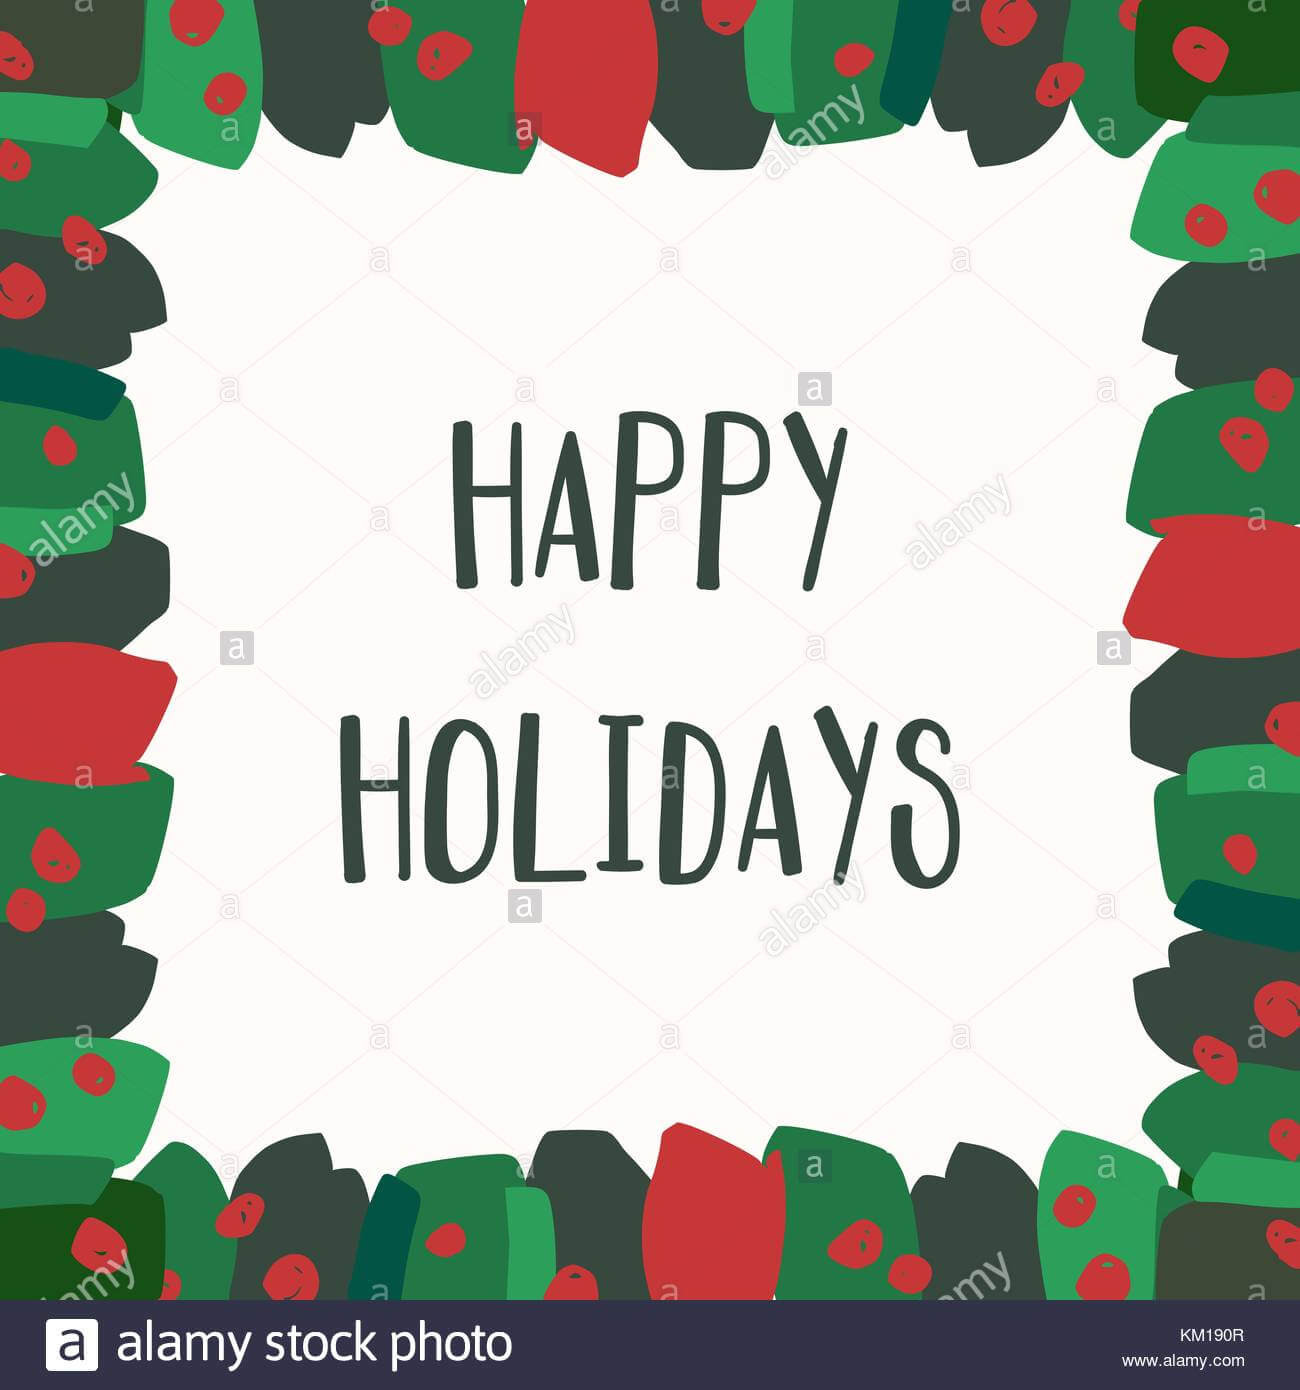 Christmas Greeting Card Template With Green And Red For Happy Holidays Card Template